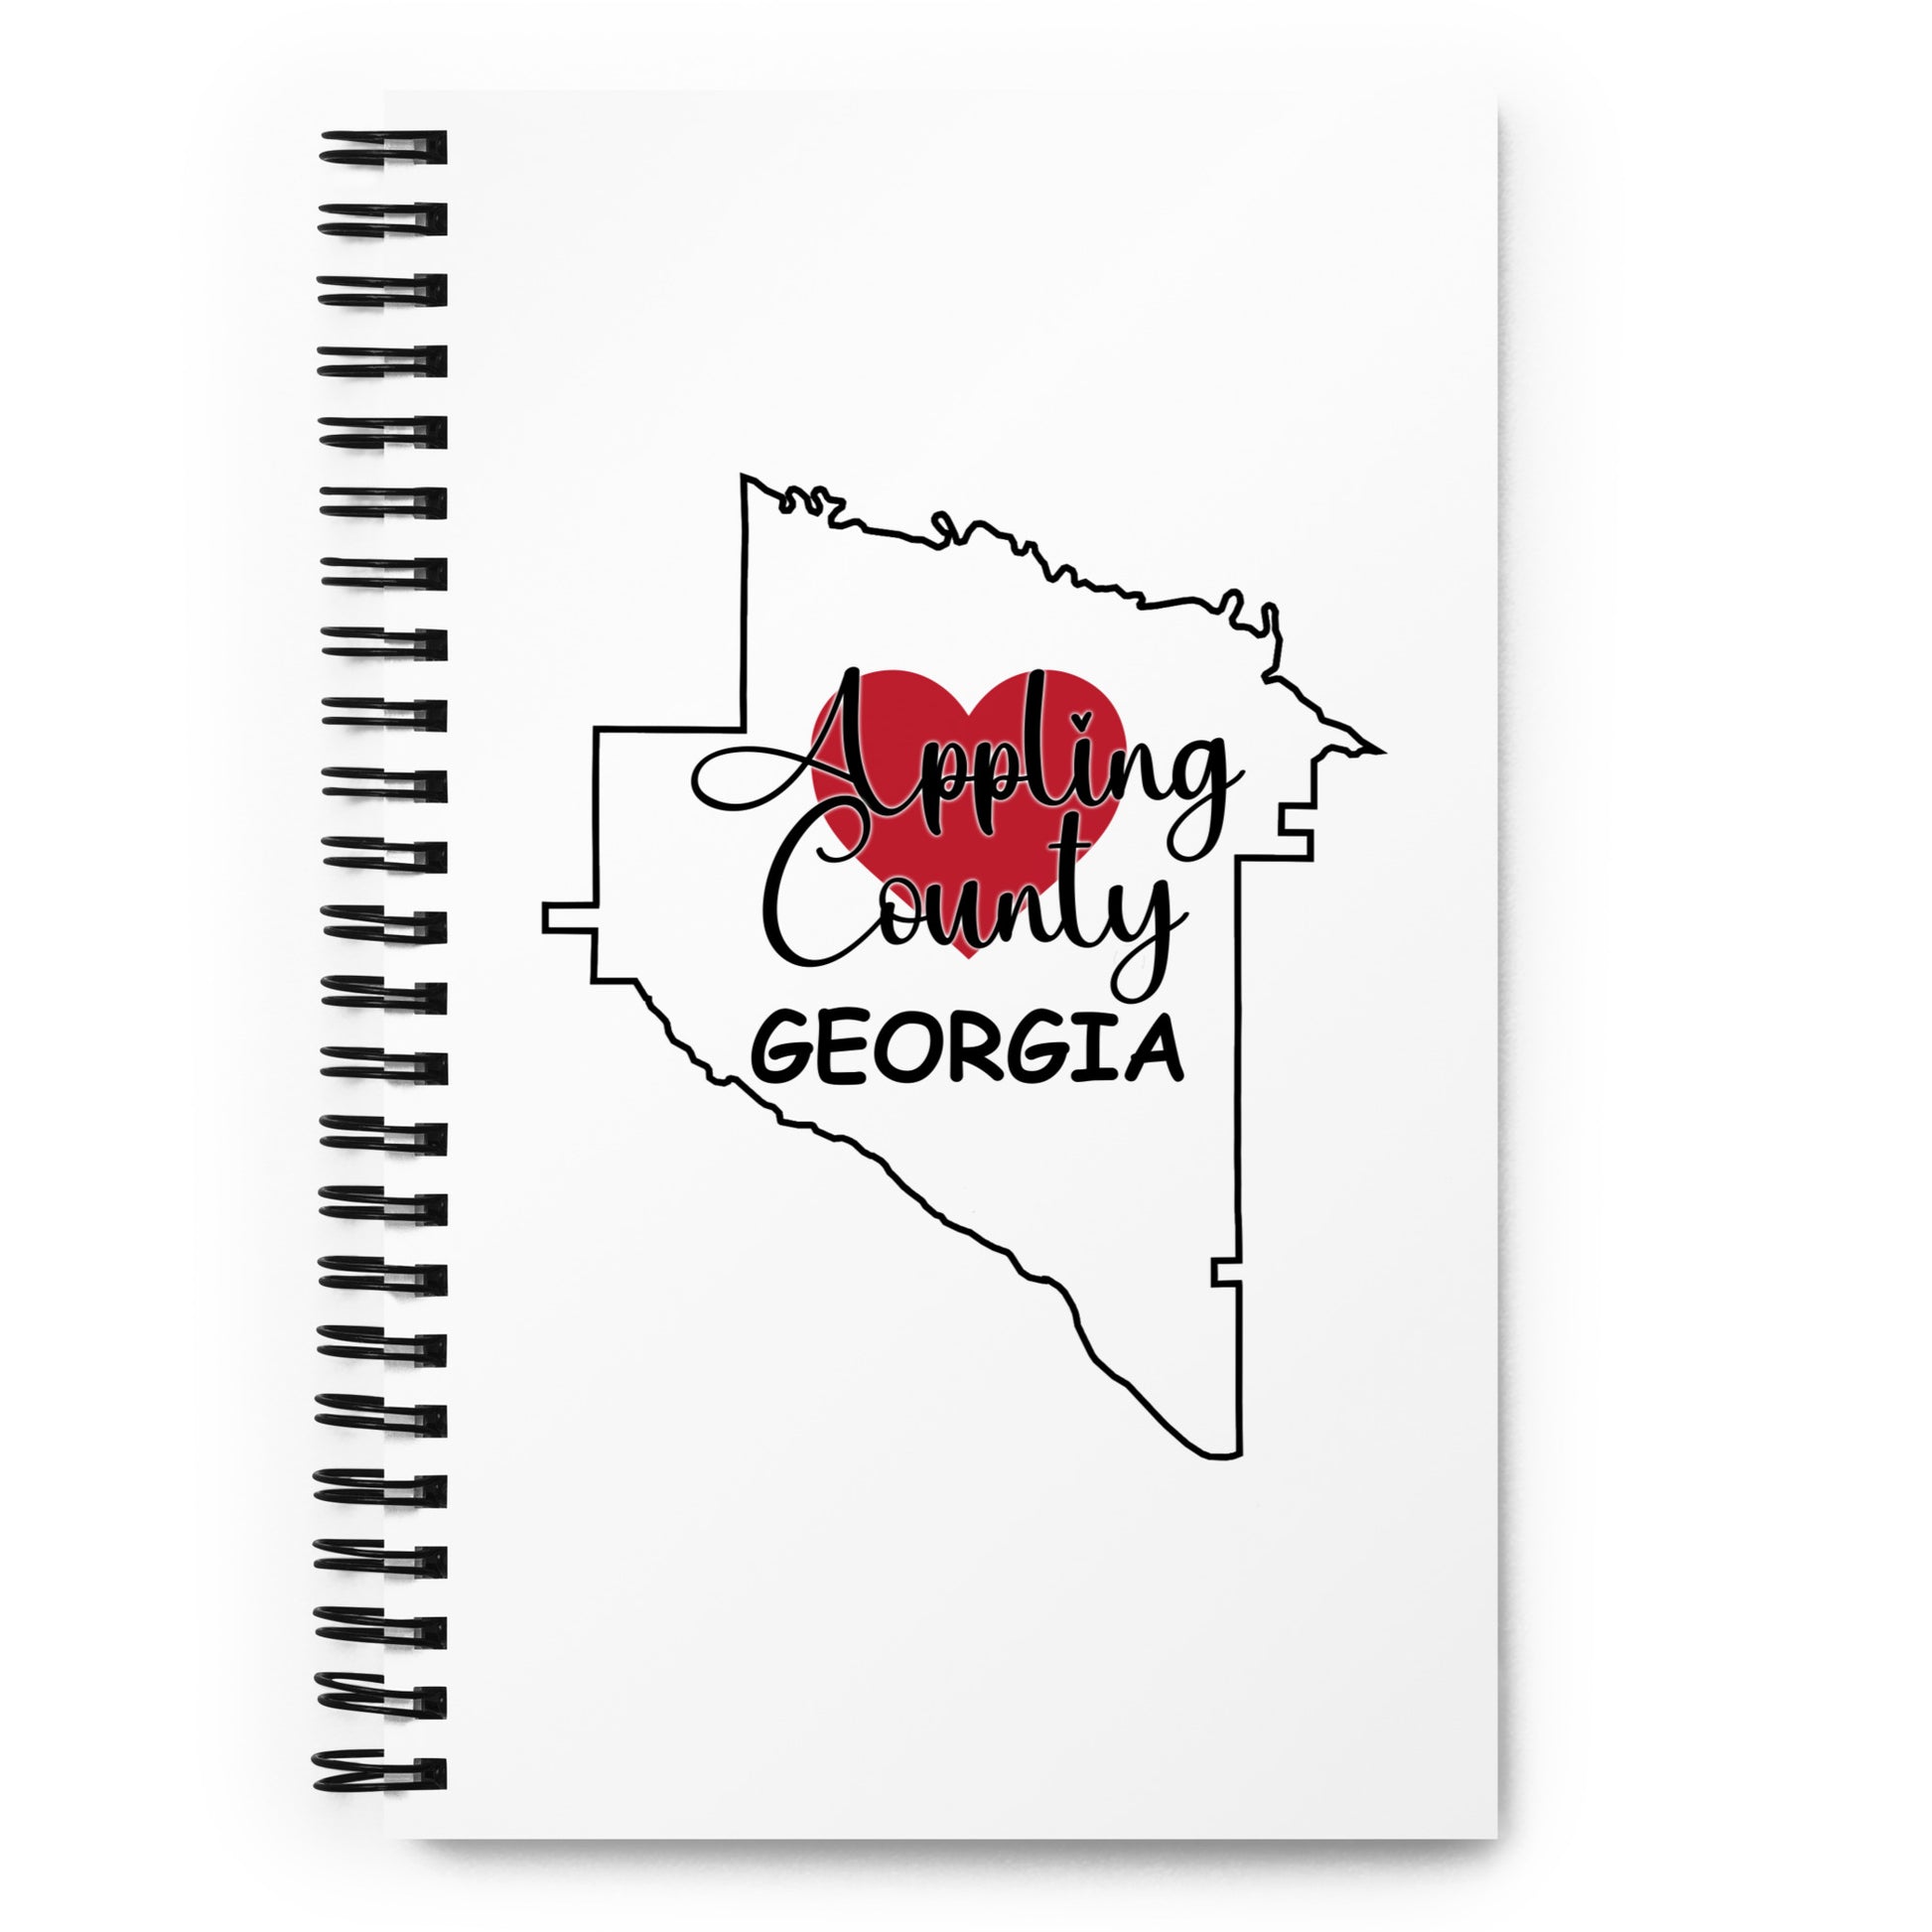 Appling County Georgia Heart in County Outline Spiral Notebook Journal Diary